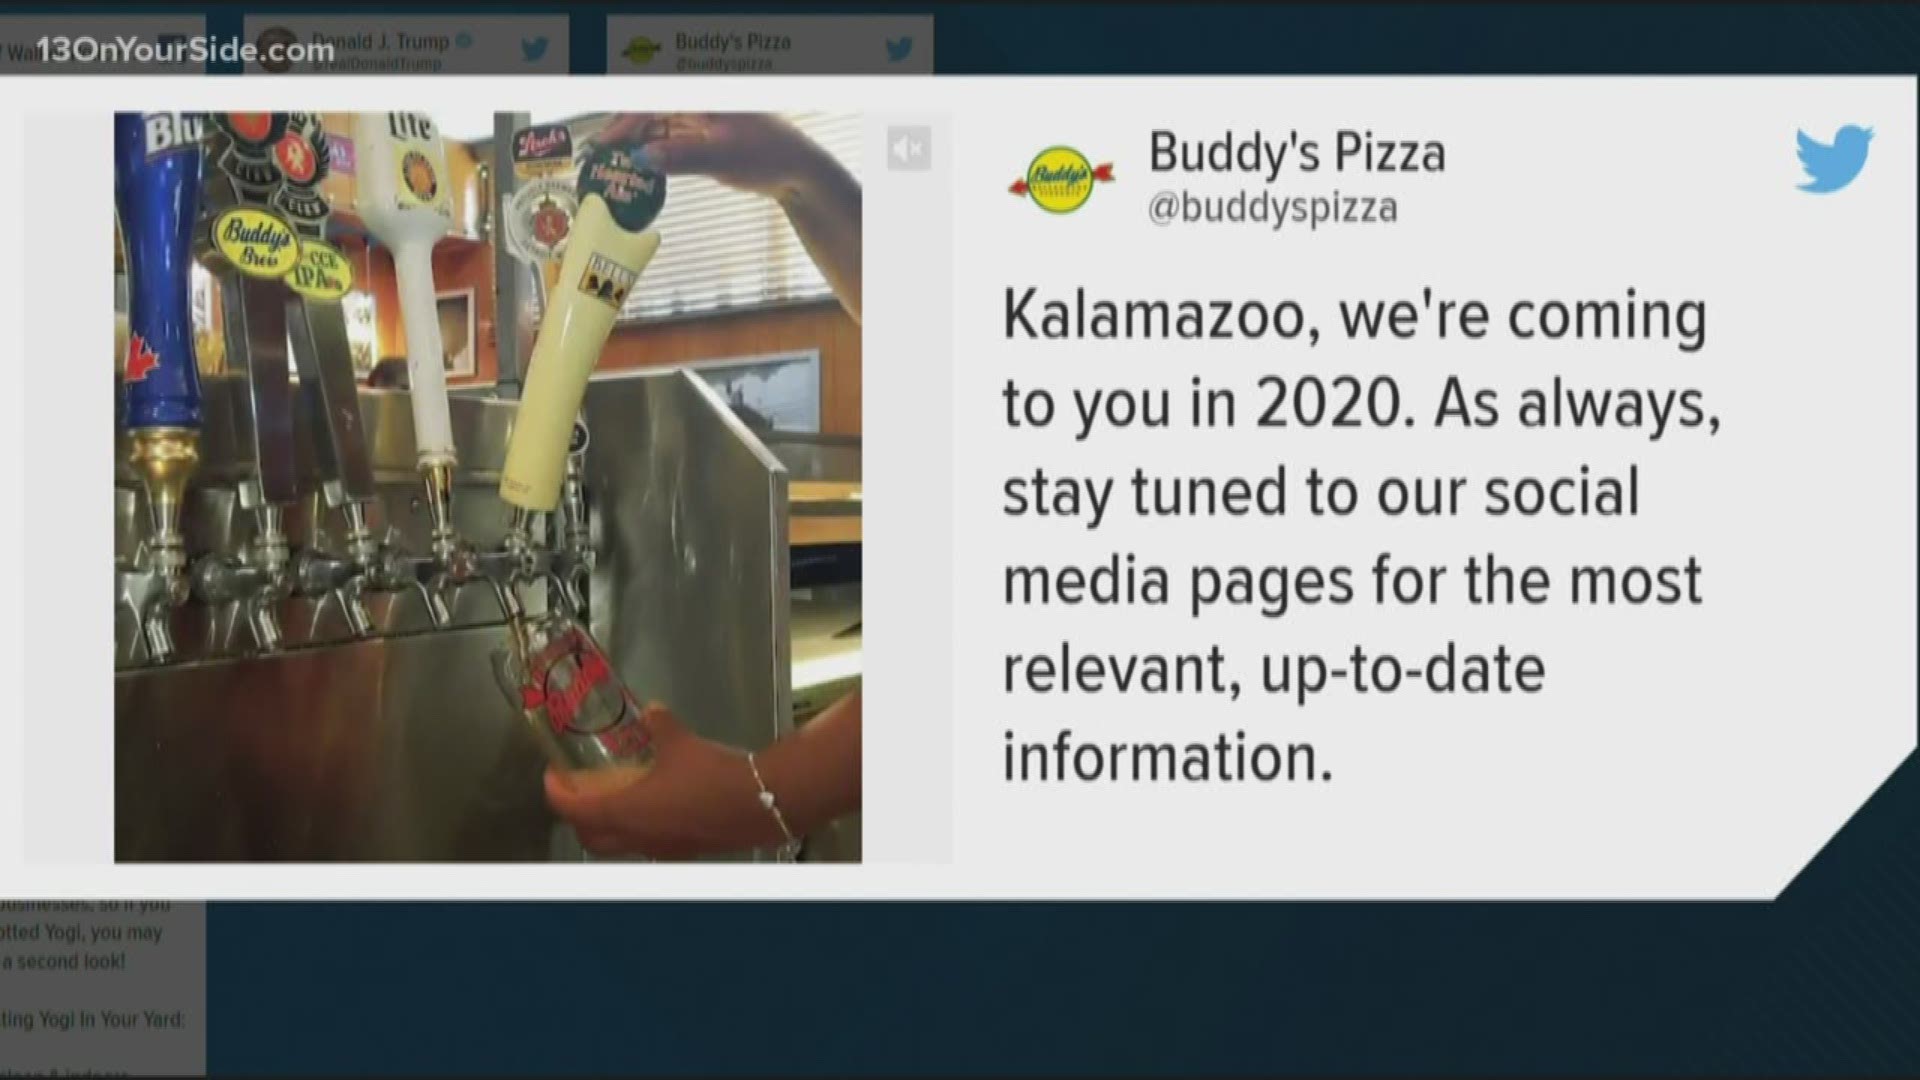 Buddy's Pizza is expanding its footprint in West Michigan. According to the Buddy's Pizza Twitter, they are coming to Kalamazoo in 2020. There weren't too many other details, but they do say to keep an eye on their social media pages for more information.